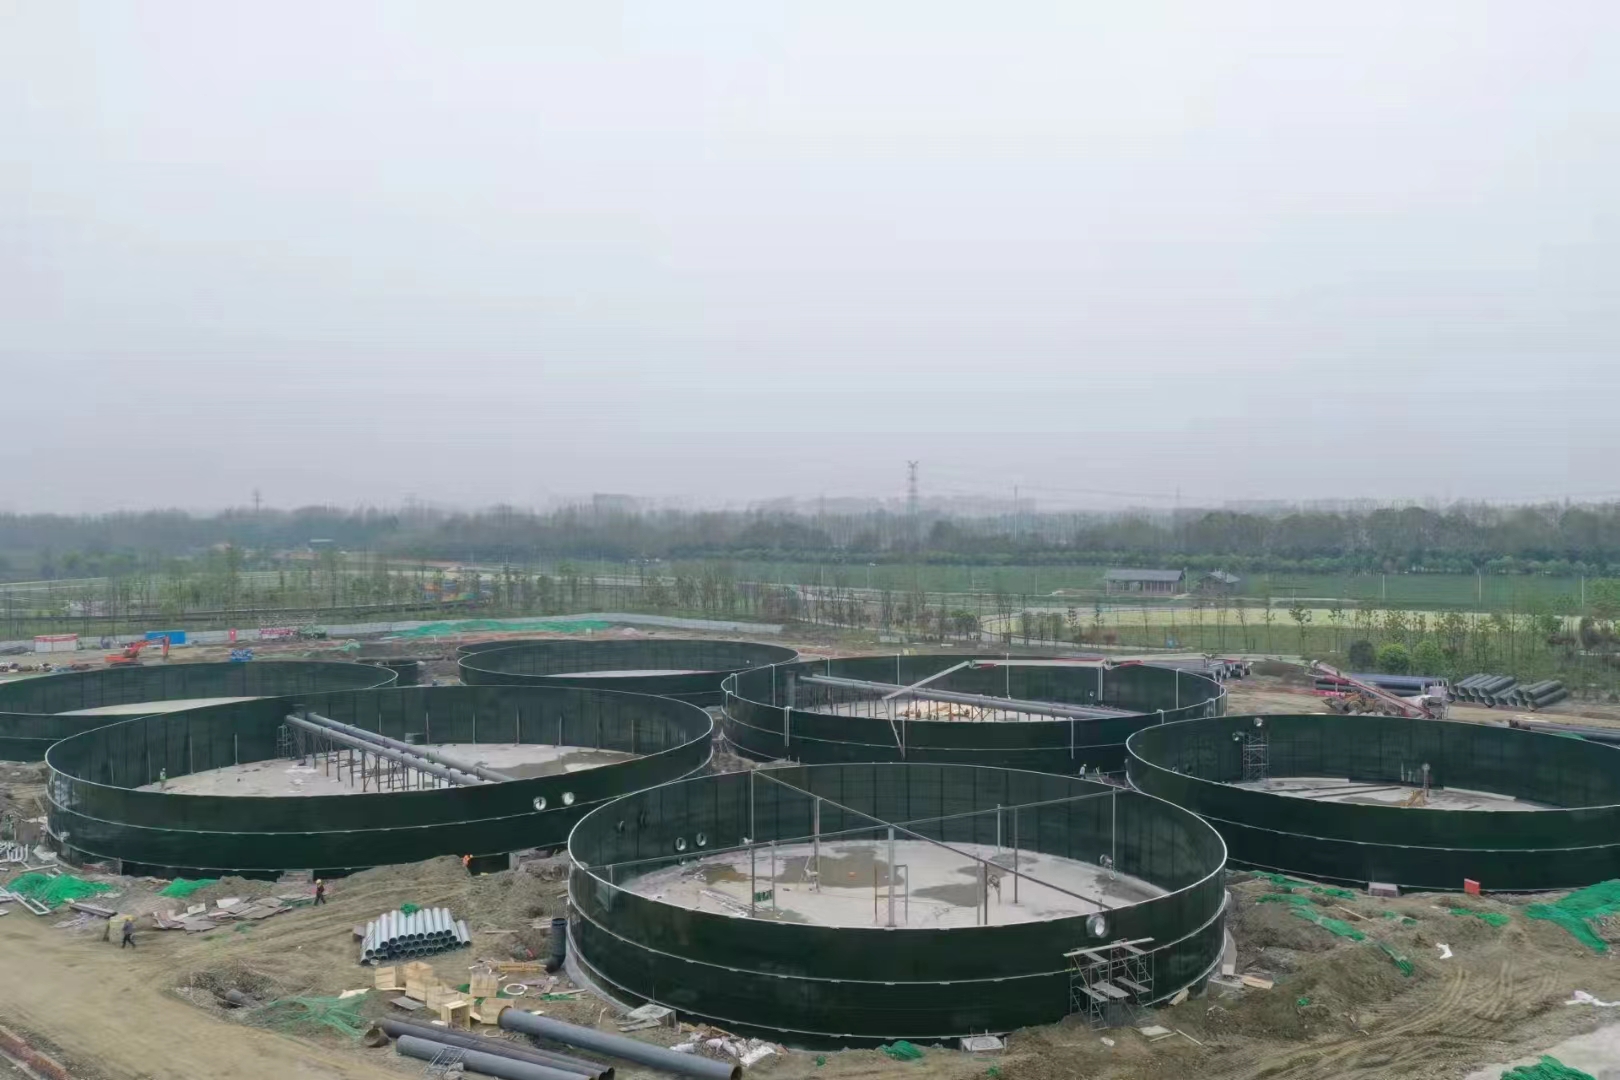 Glass fused to steel bolted tank Dia.50m Height6m for sewage water storage in Chengdu city,China    Jane@bsltank.com  +8615373670441